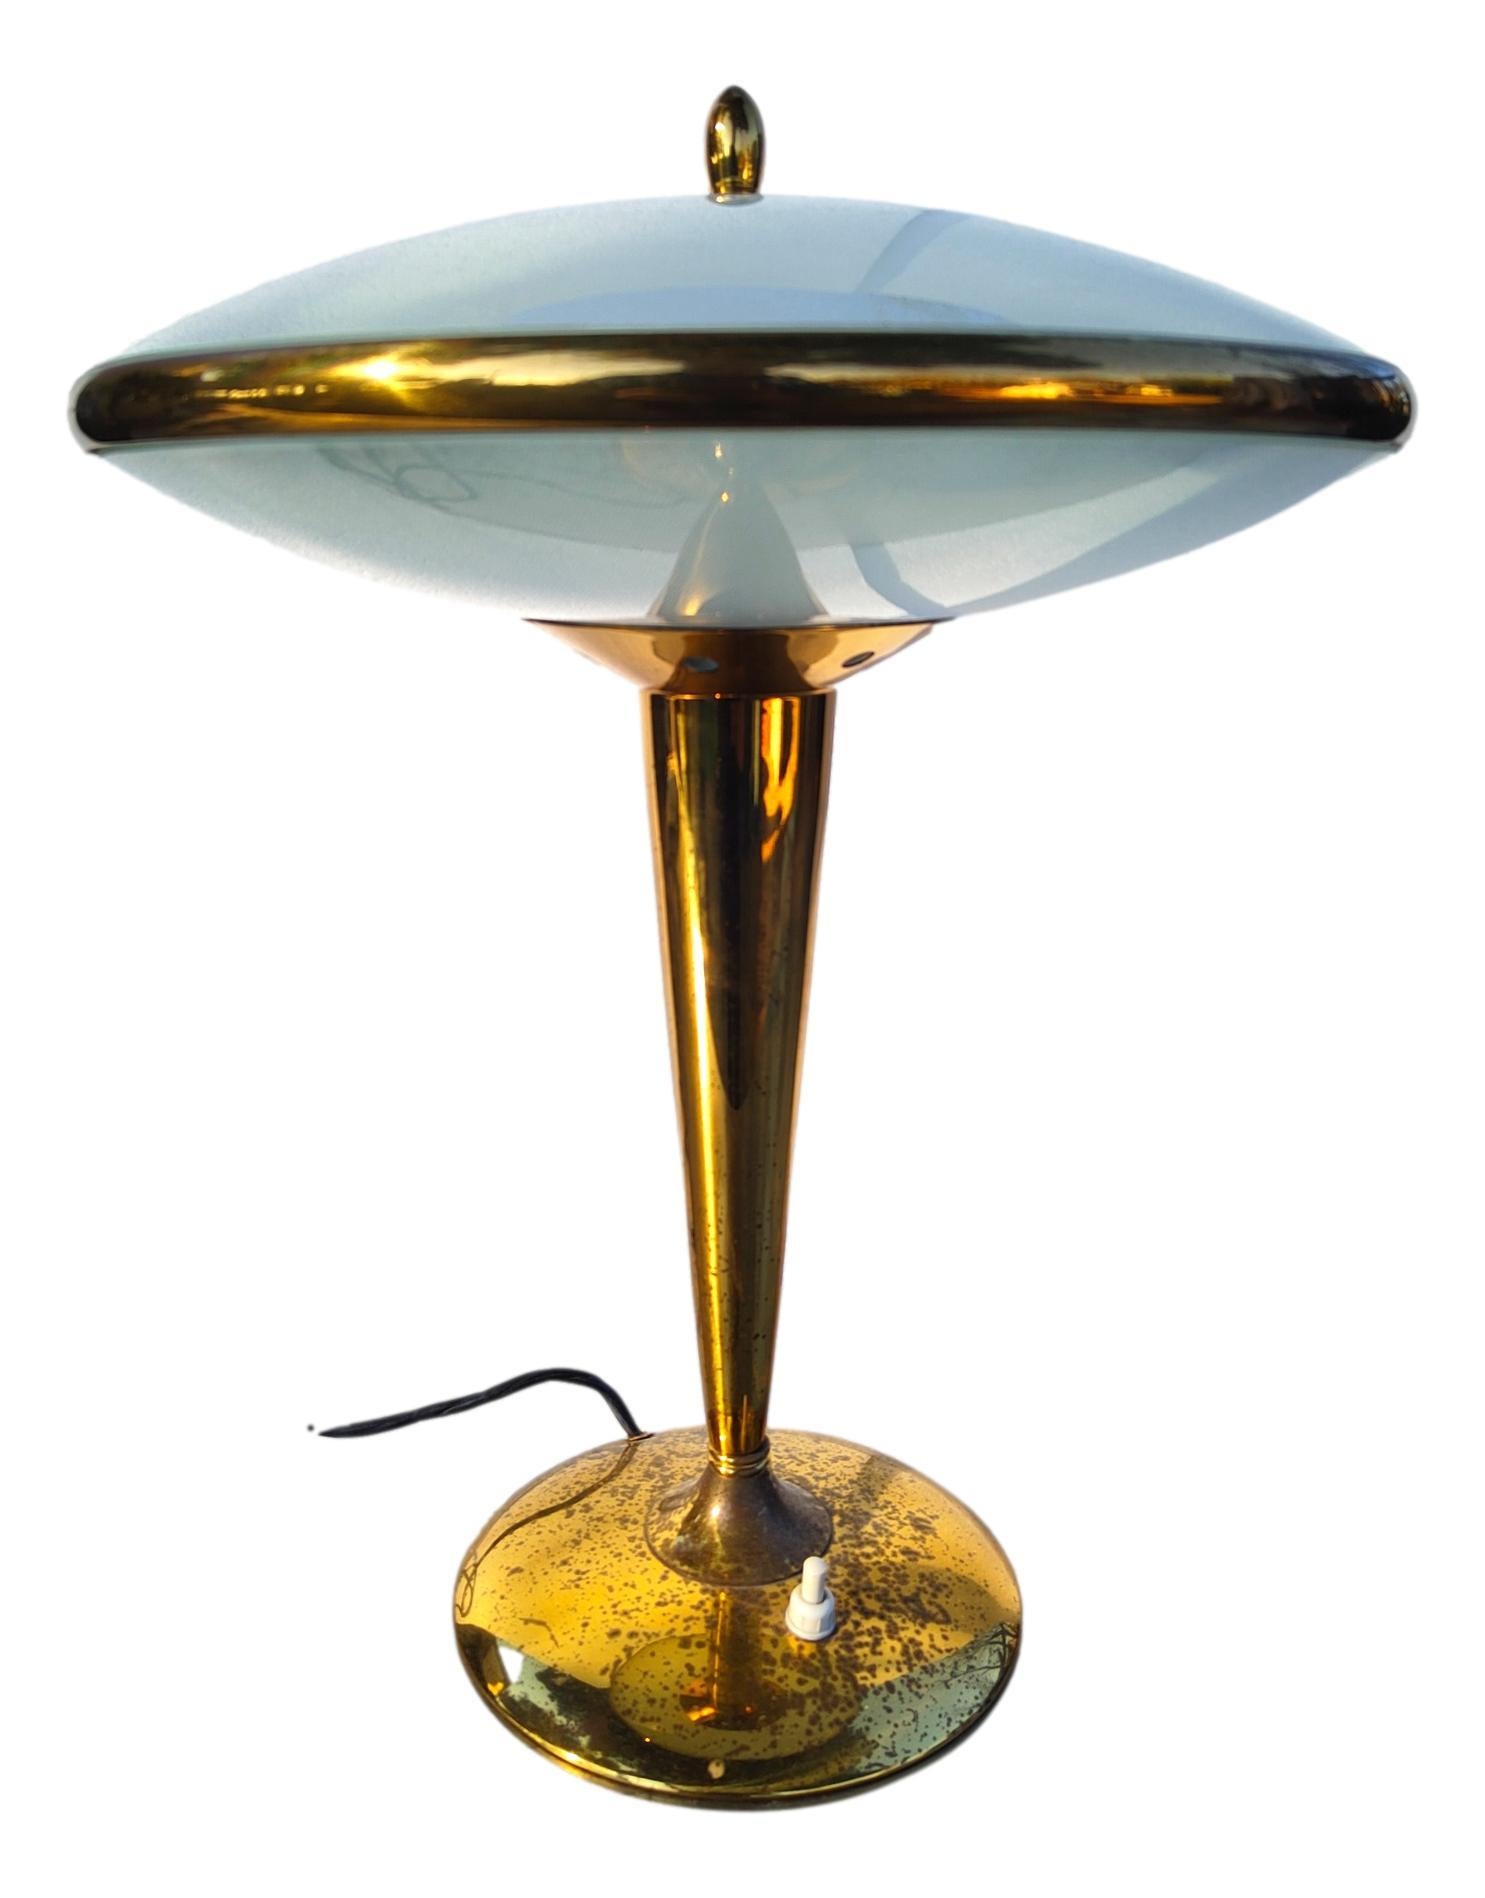 wonderful and rare midcentury table lamp, probably design by pietro chiesa for fontana arte or oscar torlasco.
Made all in brass with double opaline glass.
These are the measurements:
height cm 39, diameter of the top part cm 30, diameter of the